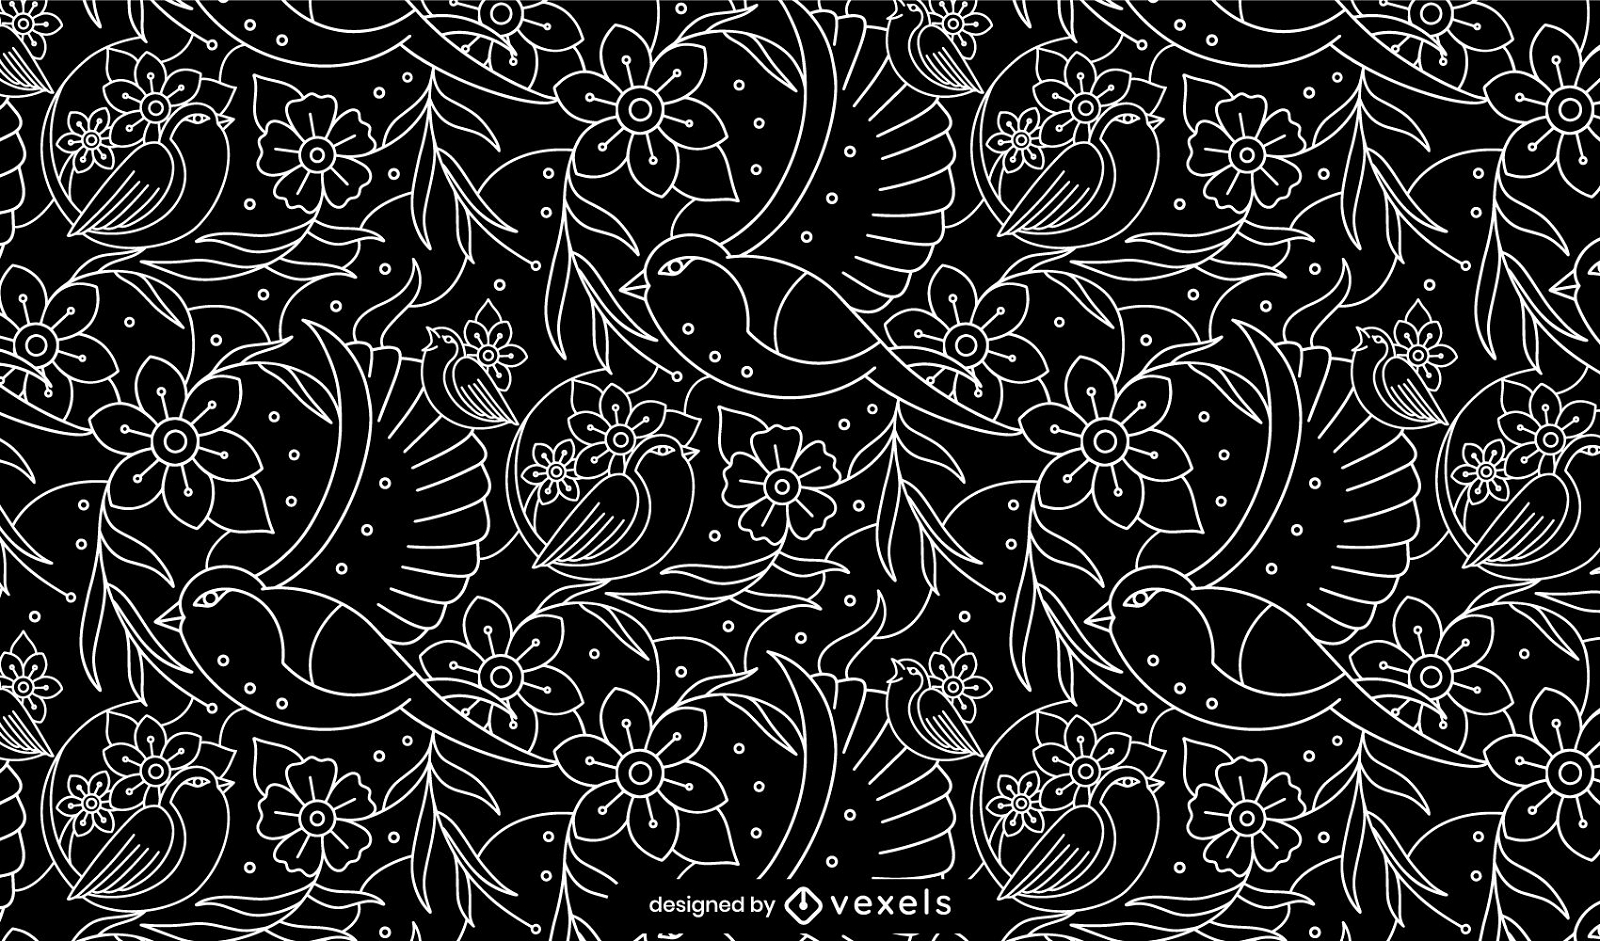 Flowers and birds pattern design